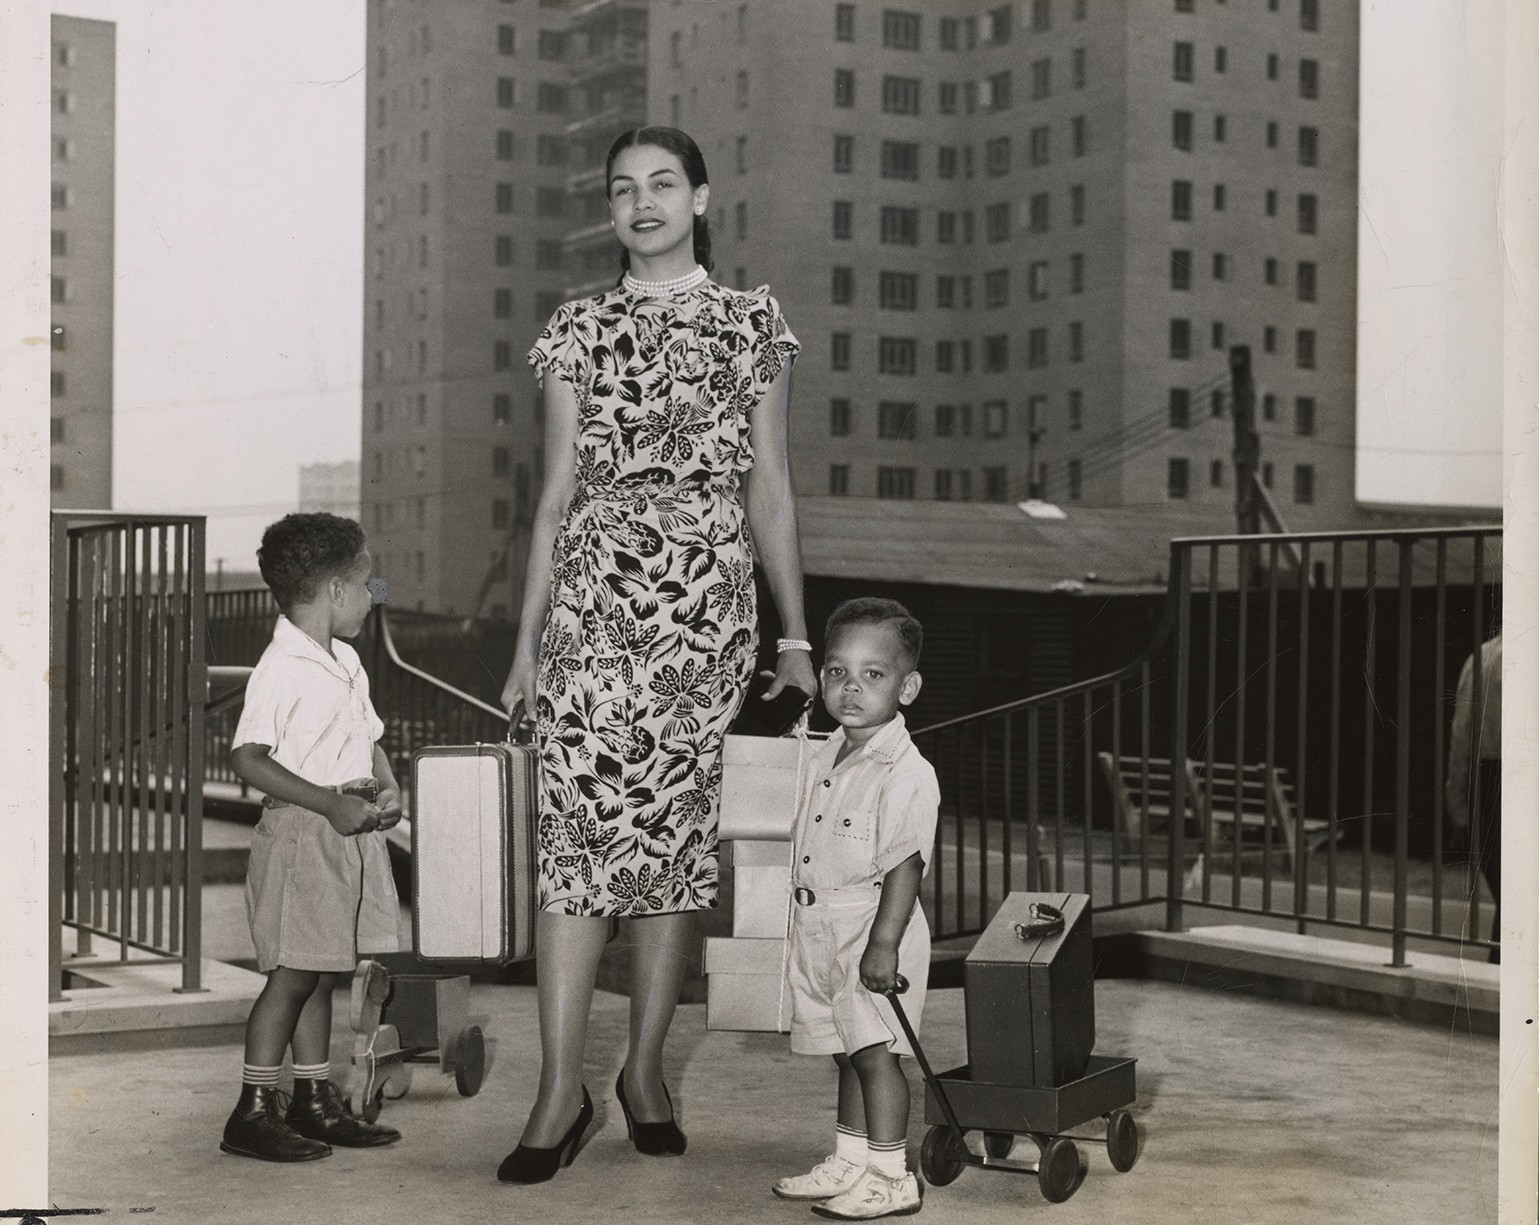 Mattie Faulkner and her children moving in, Riverton Houses, July 29, 1947, Photographs & Prints Division, Schomburg Center for Research in Black Culture, New York Public Library